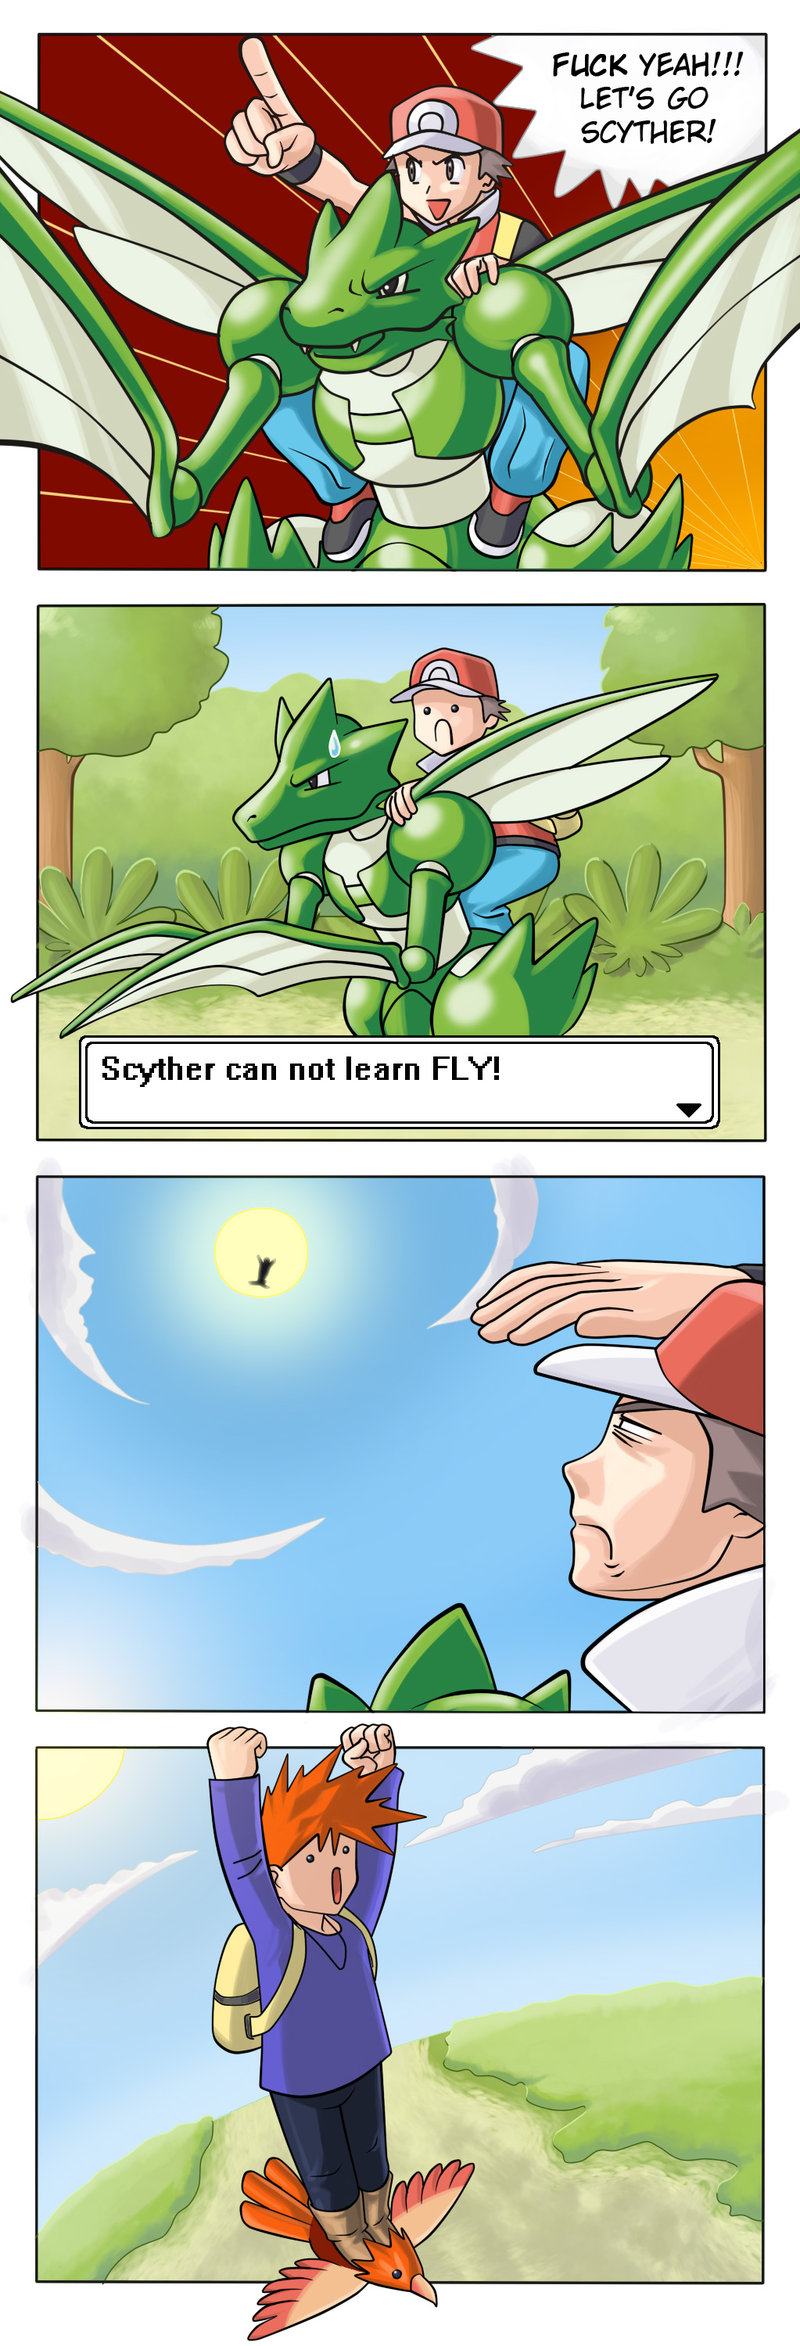 scyther can t learn fly - Fuck Yeah!!! Let'S Go Scyther! Scyther can not learn Fly!